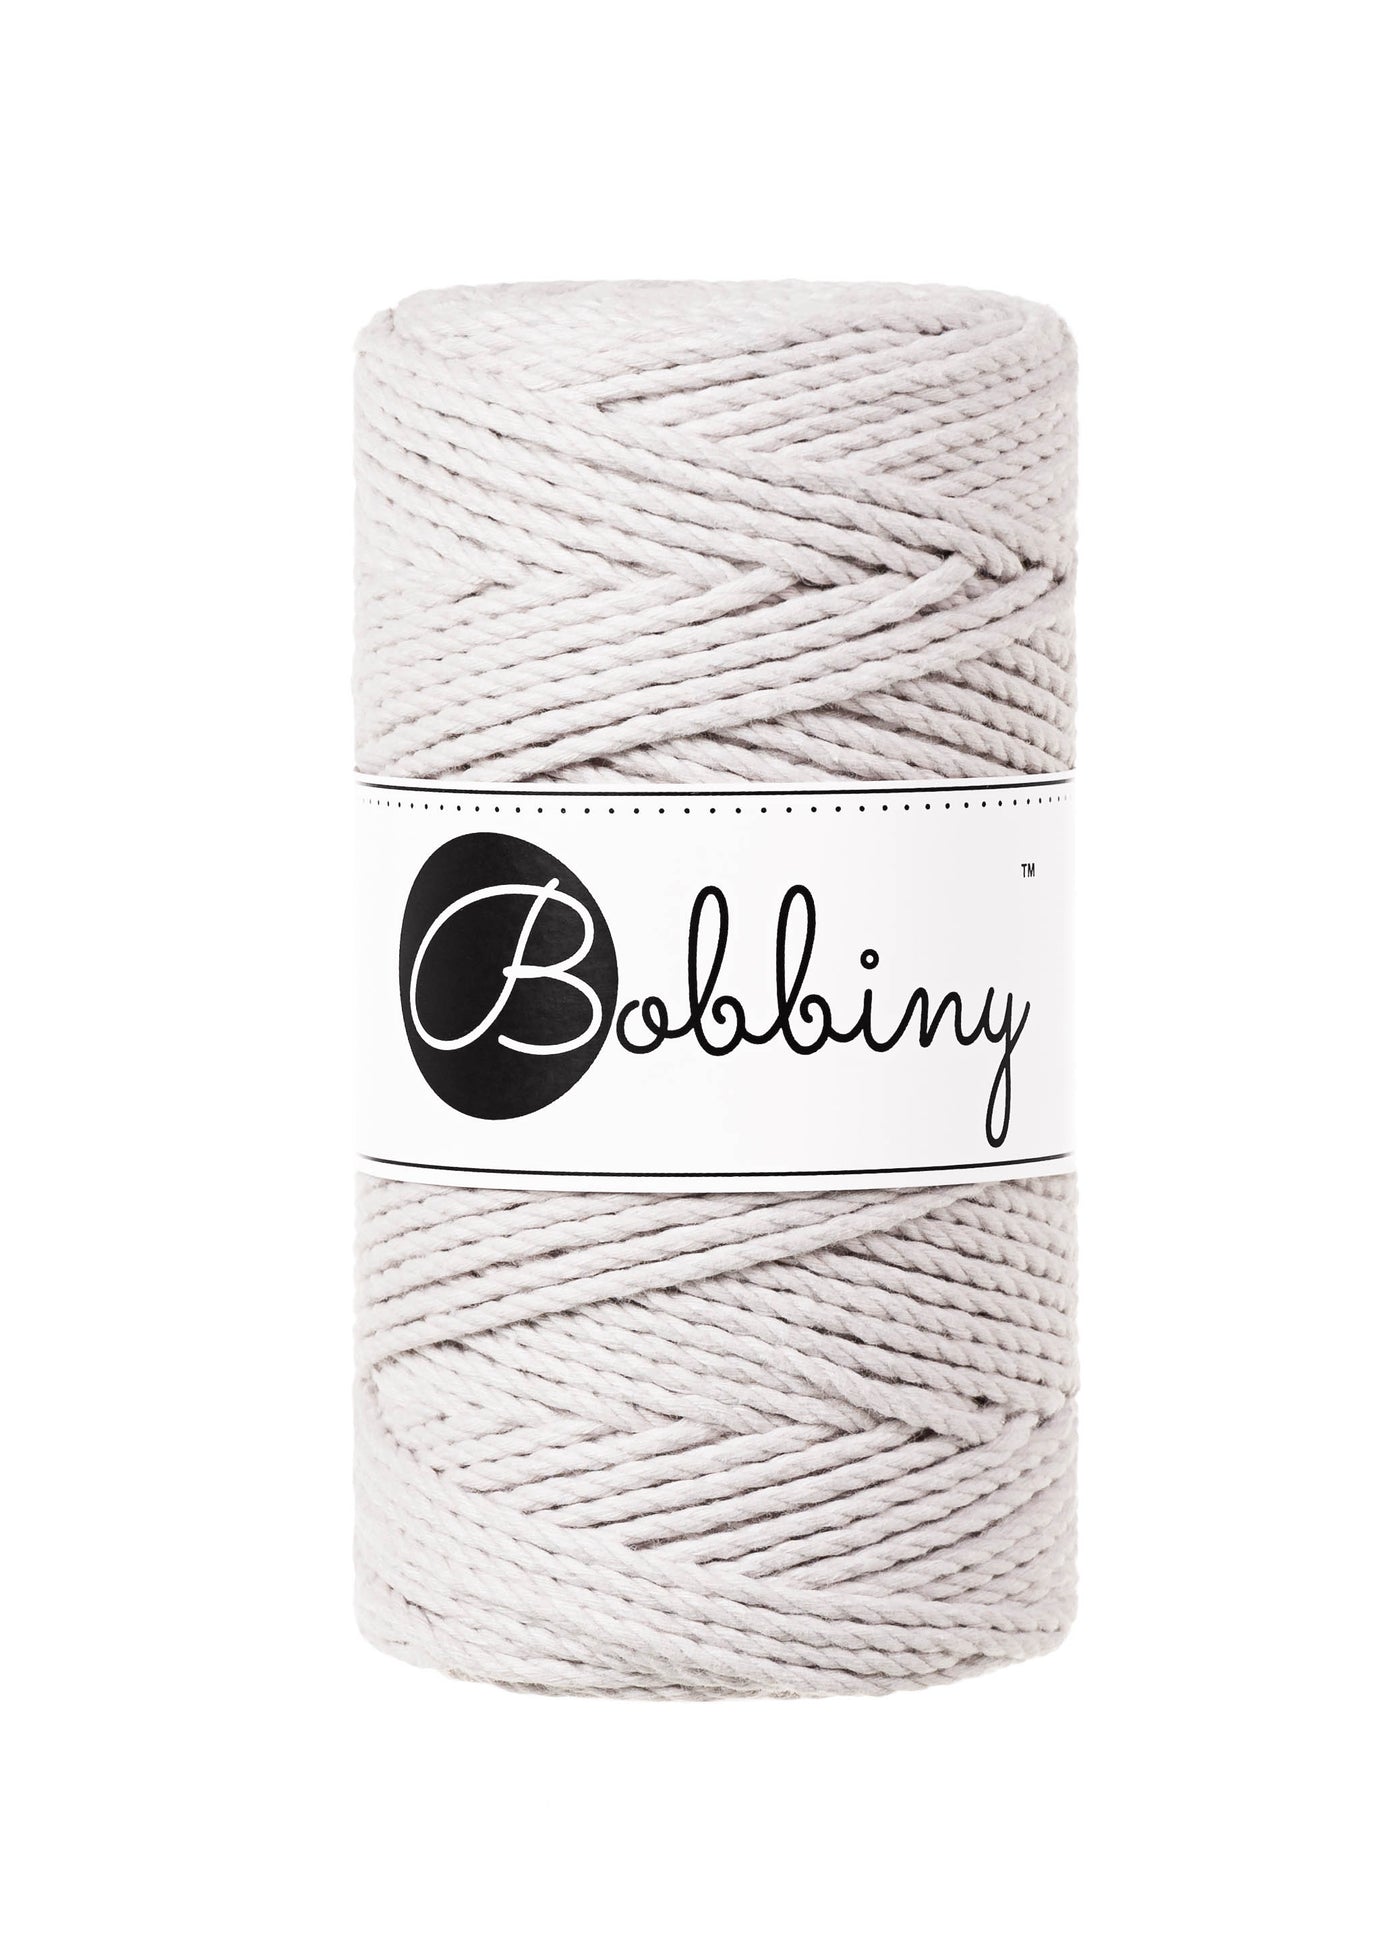 Made from 100% recycled cotton, this product is perfect for Macrame projects due to its sturdiness. It contains no harmful dyes or chemicals and is OEKO-TEK certified.  This super soft triple twist rope also makes the most spectacular fringes and tassels.  Length: 100m (108 Yards)  Weight: 400gms  Contains 60 Fibres ( 3x20 )  Also available in 5mm